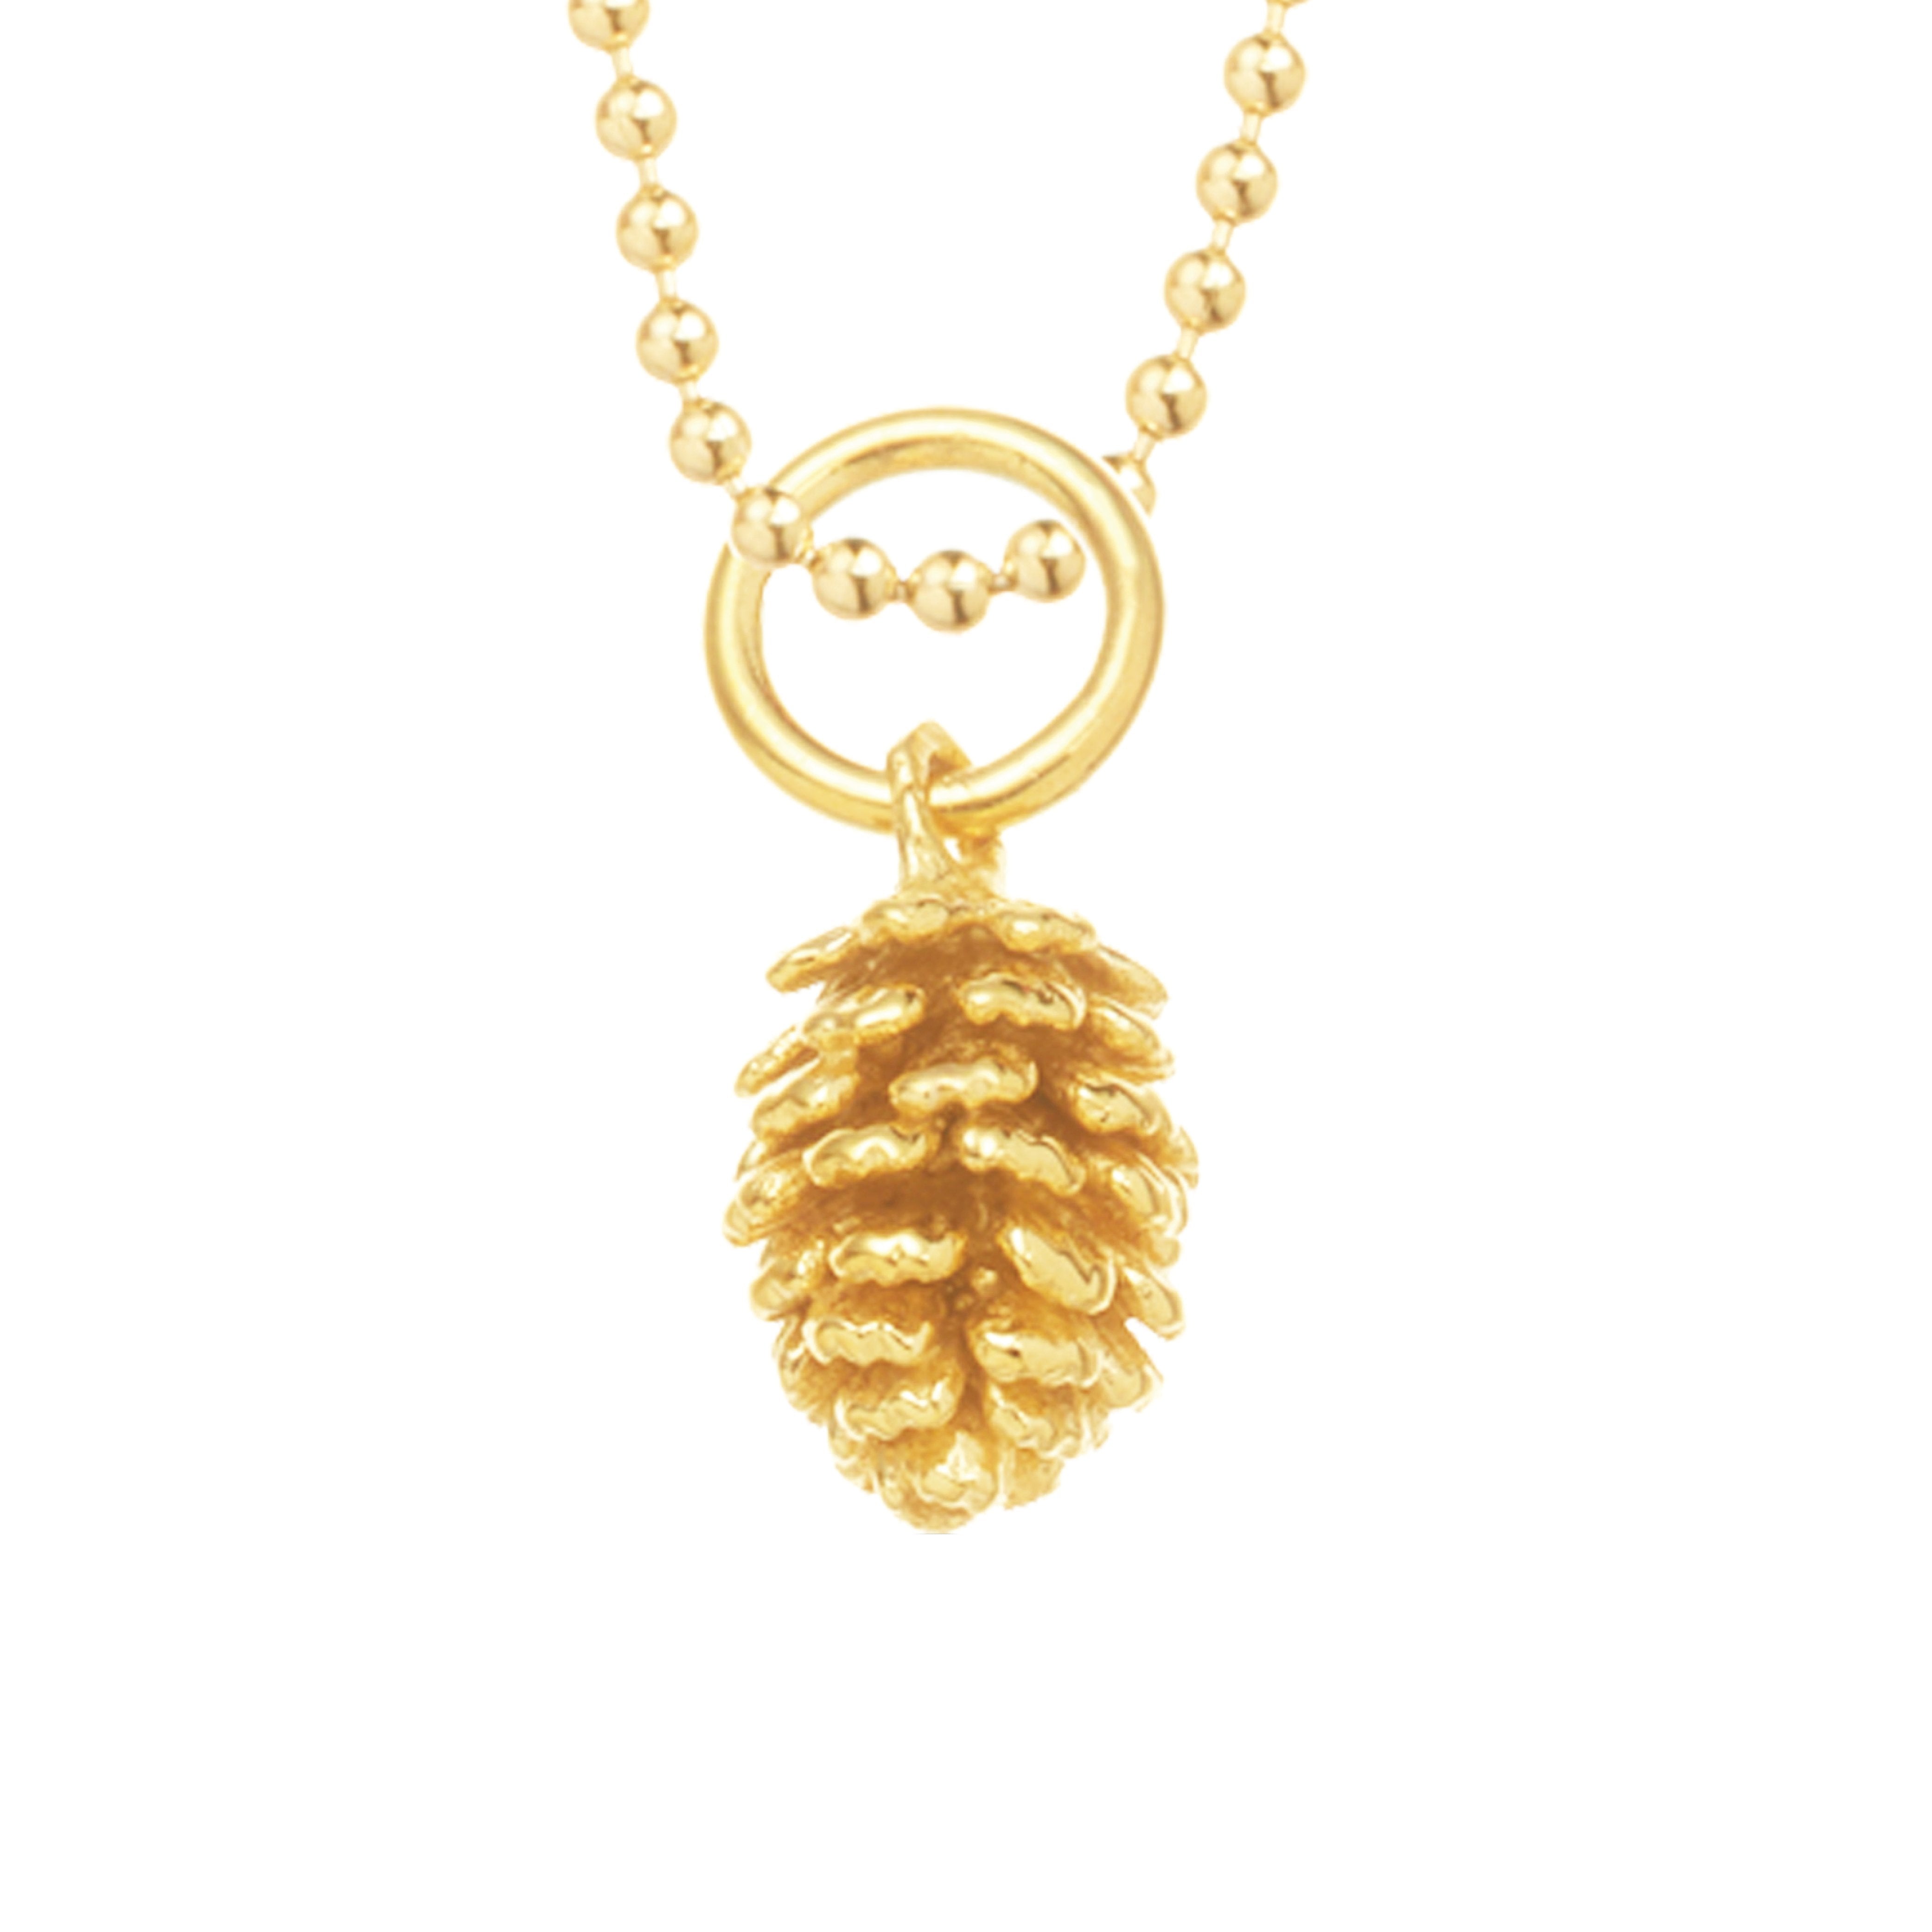 Gold pinecone charm from JuJu supply.